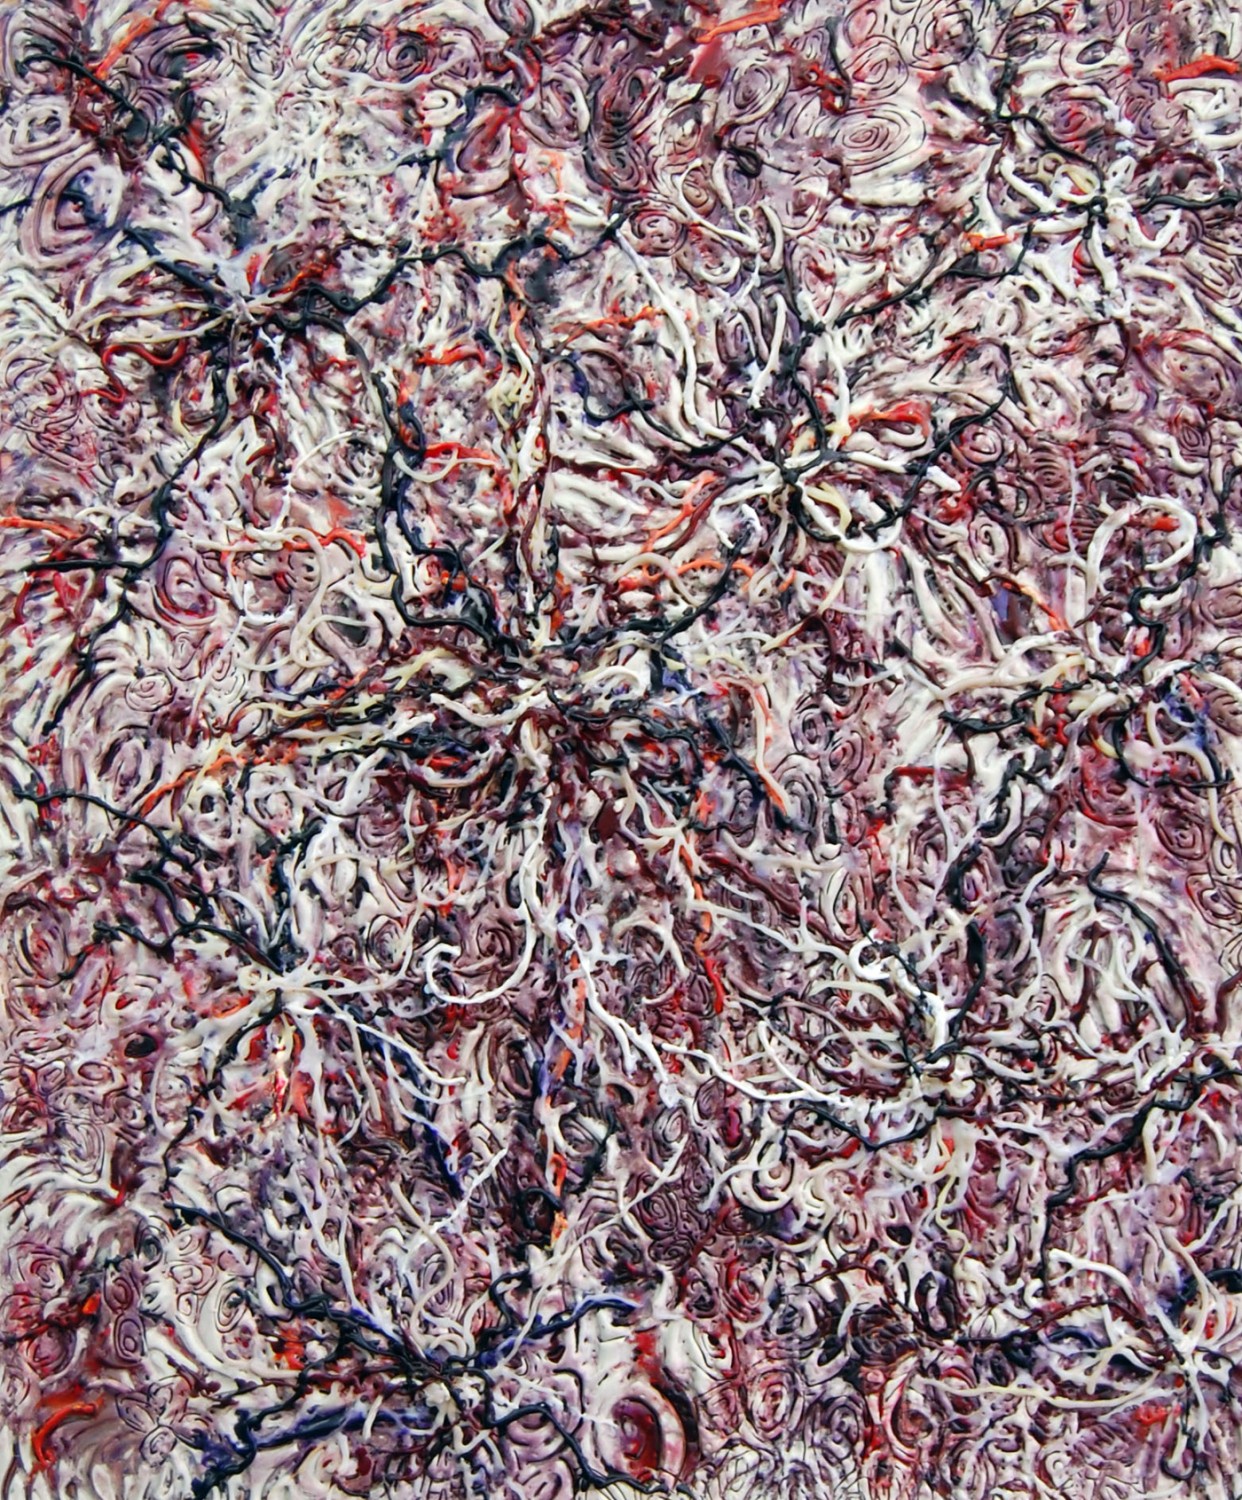 Violet Ganglia, 2010, encaustic on panel, 24 x 29 inches